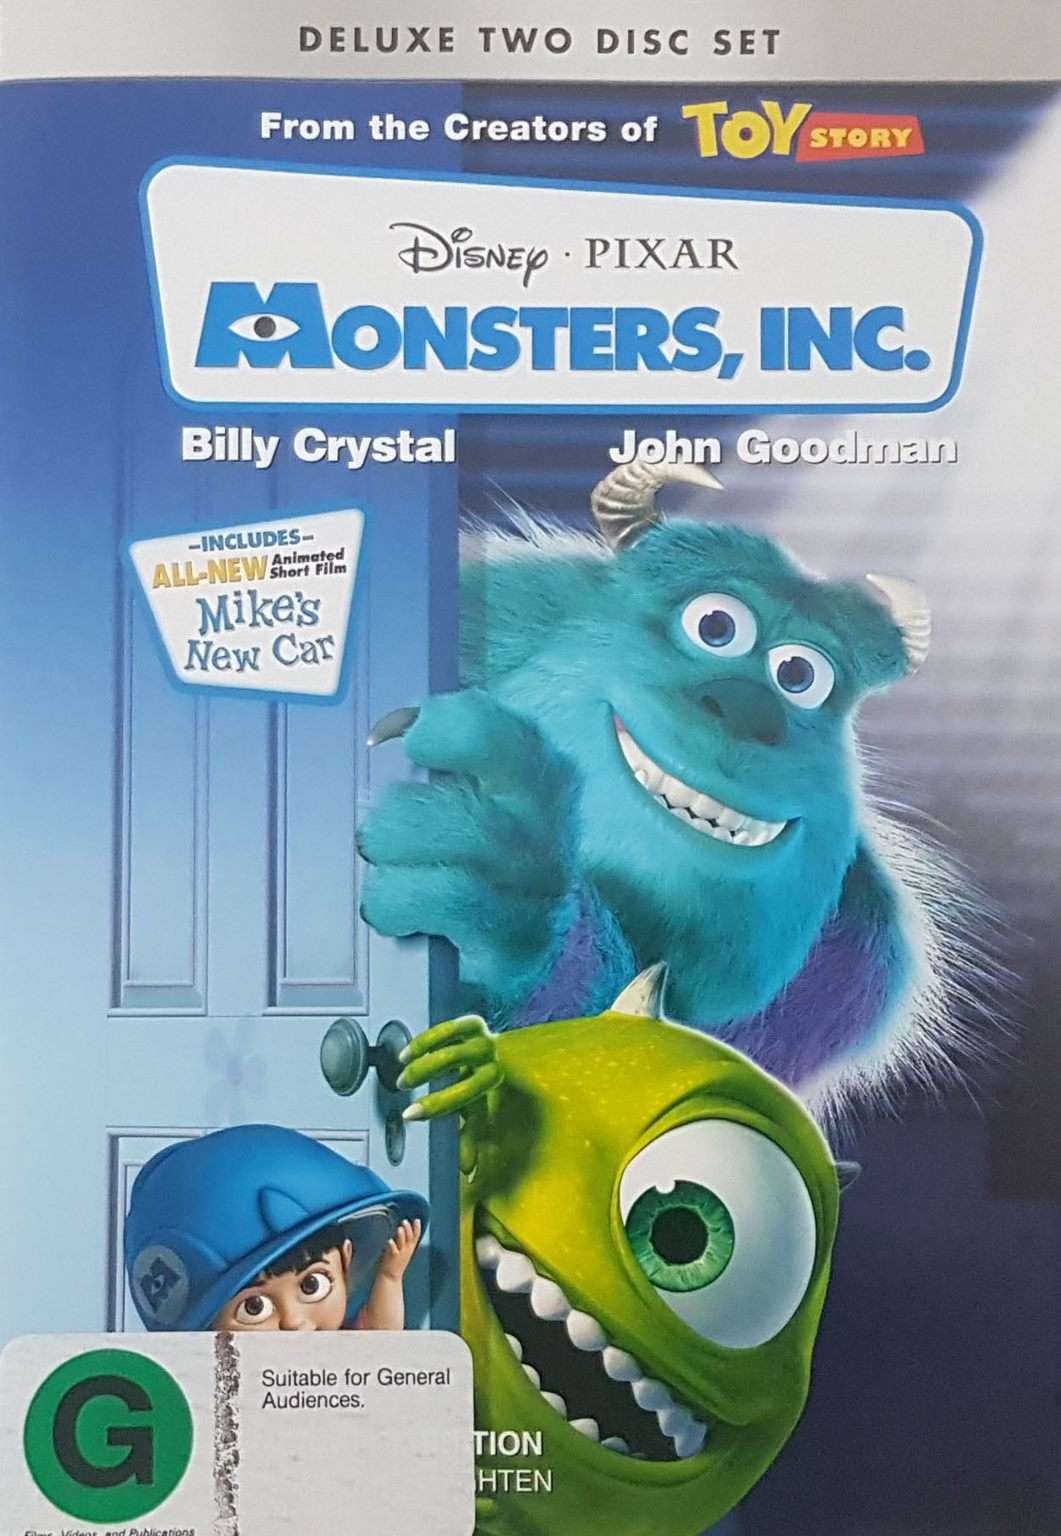 Monsters, Inc. Two Disc Deluxe Set